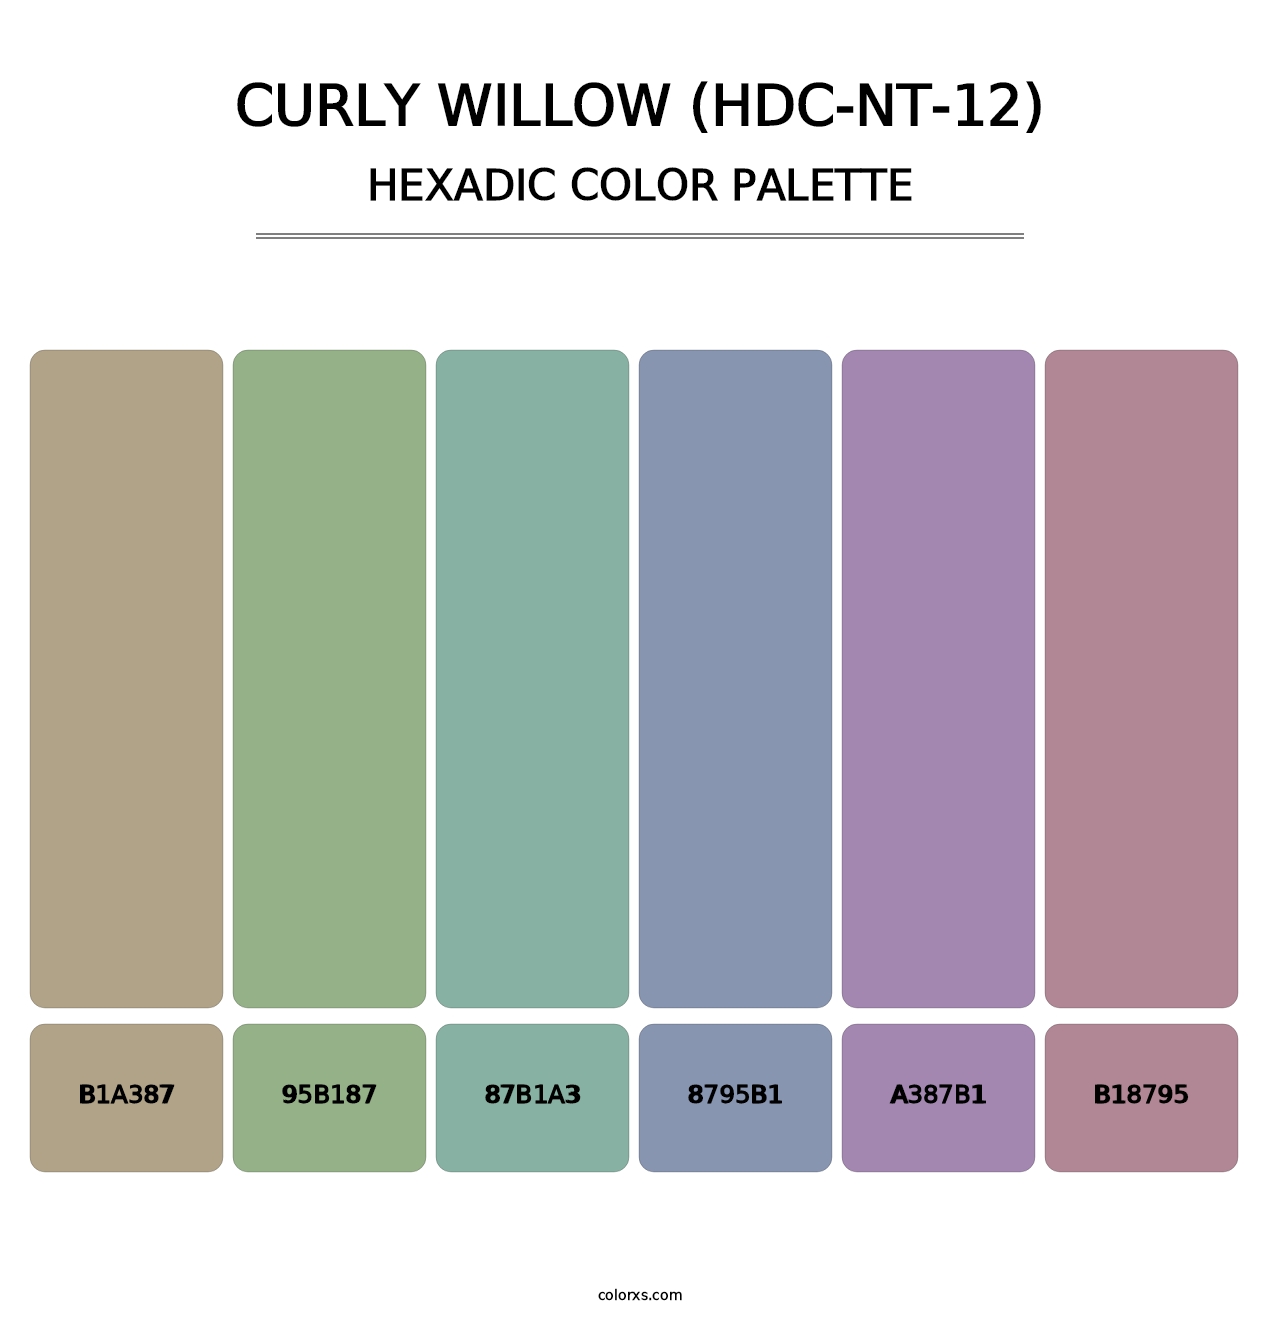 Curly Willow (HDC-NT-12) - Hexadic Color Palette